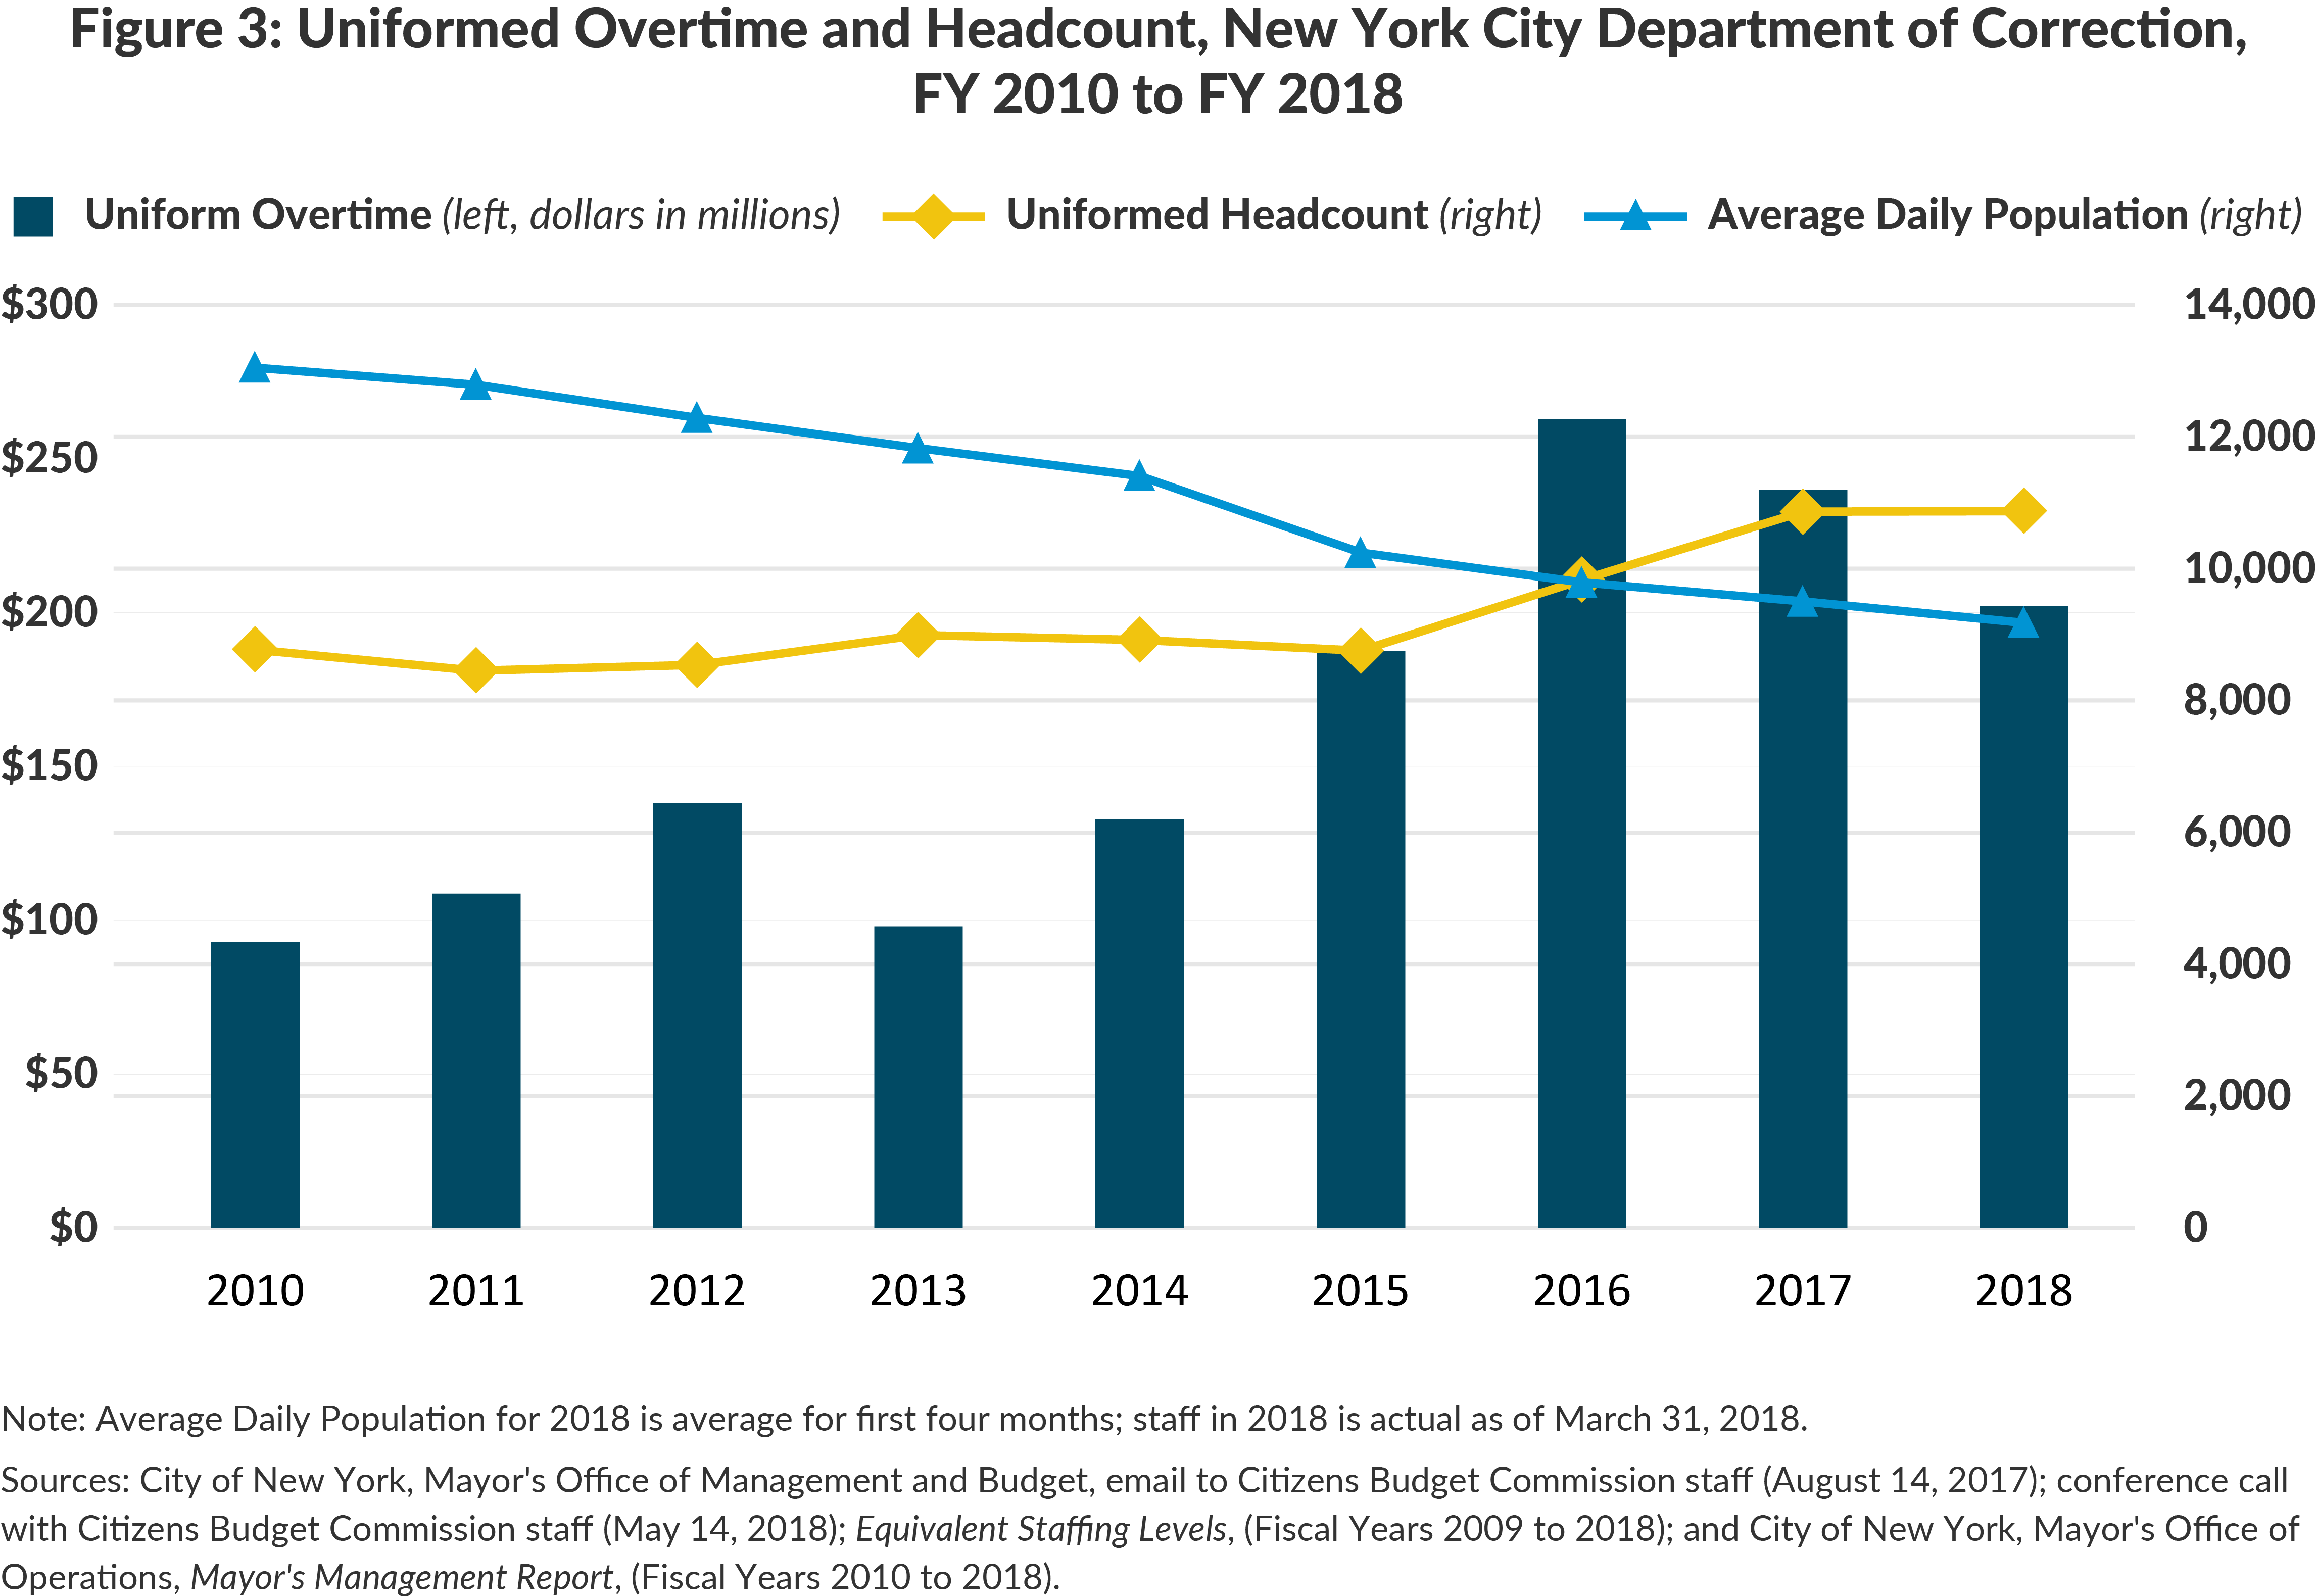 Figure 3: Uniformed Overtime and Headcount, New York City Department of Correction, FY 2010 to FY 2018